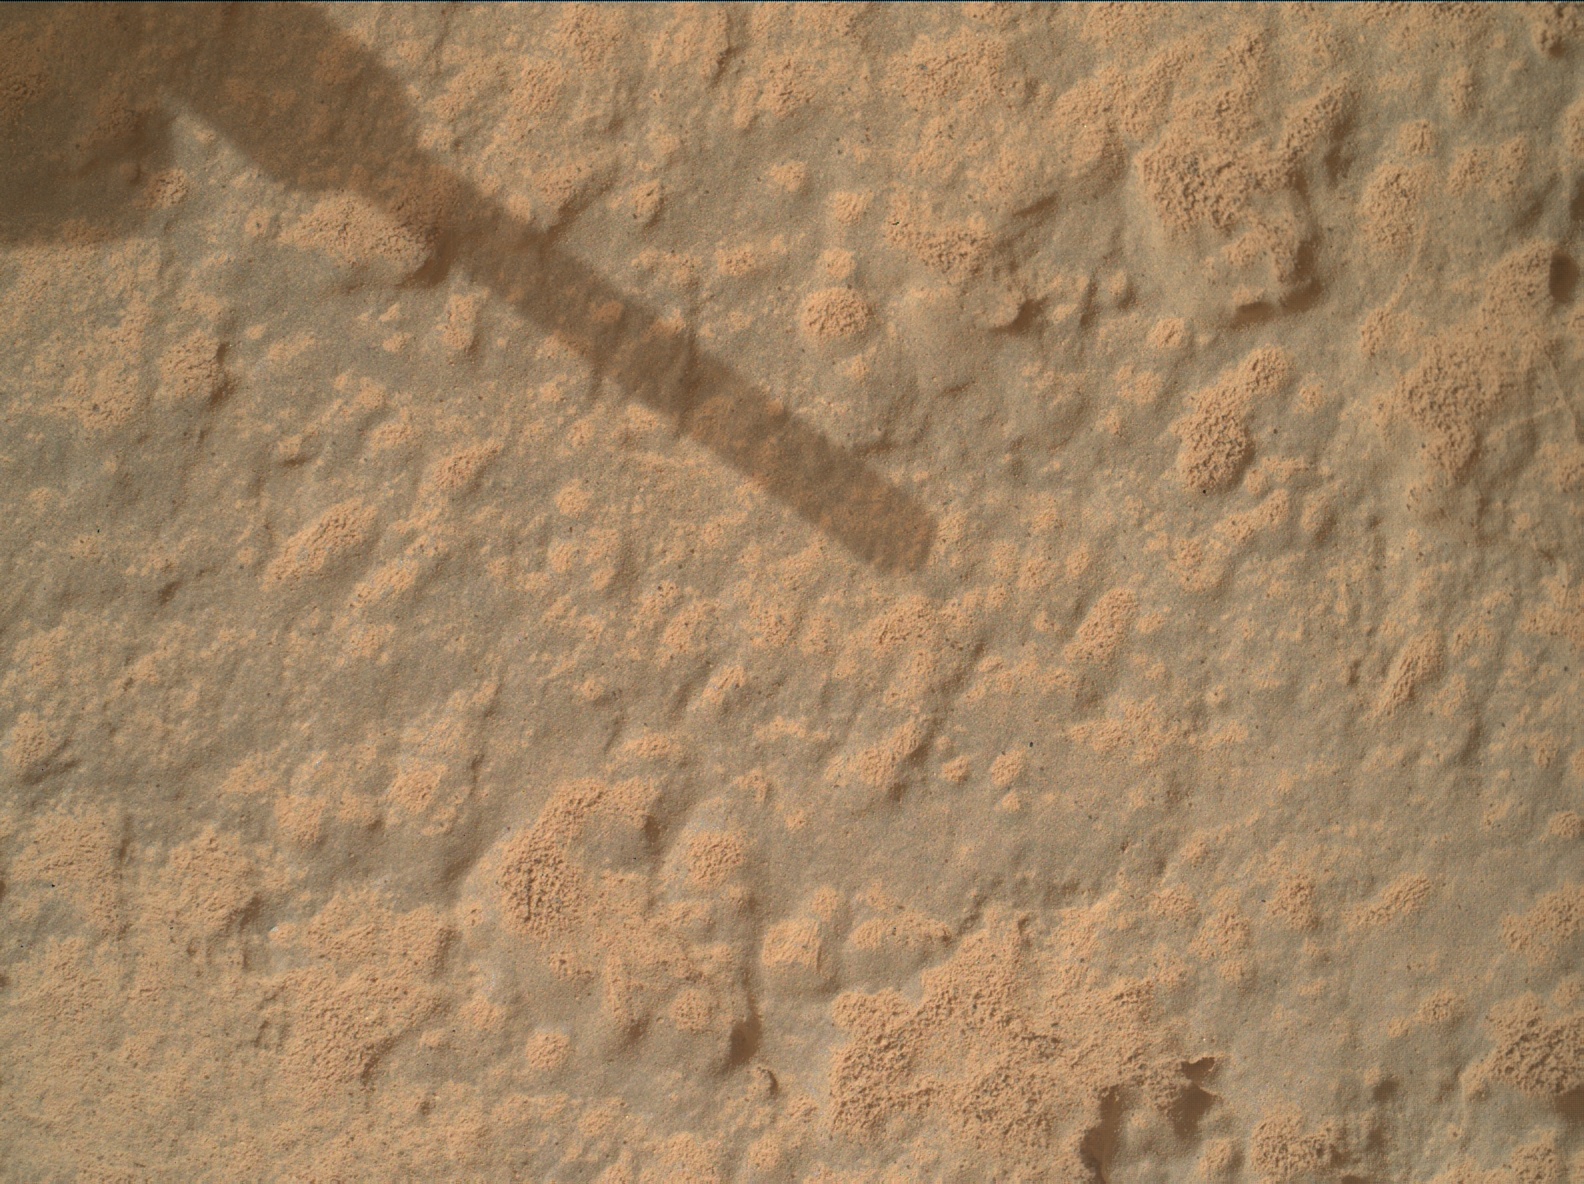 Nasa's Mars rover Curiosity acquired this image using its Mars Hand Lens Imager (MAHLI) on Sol 3639